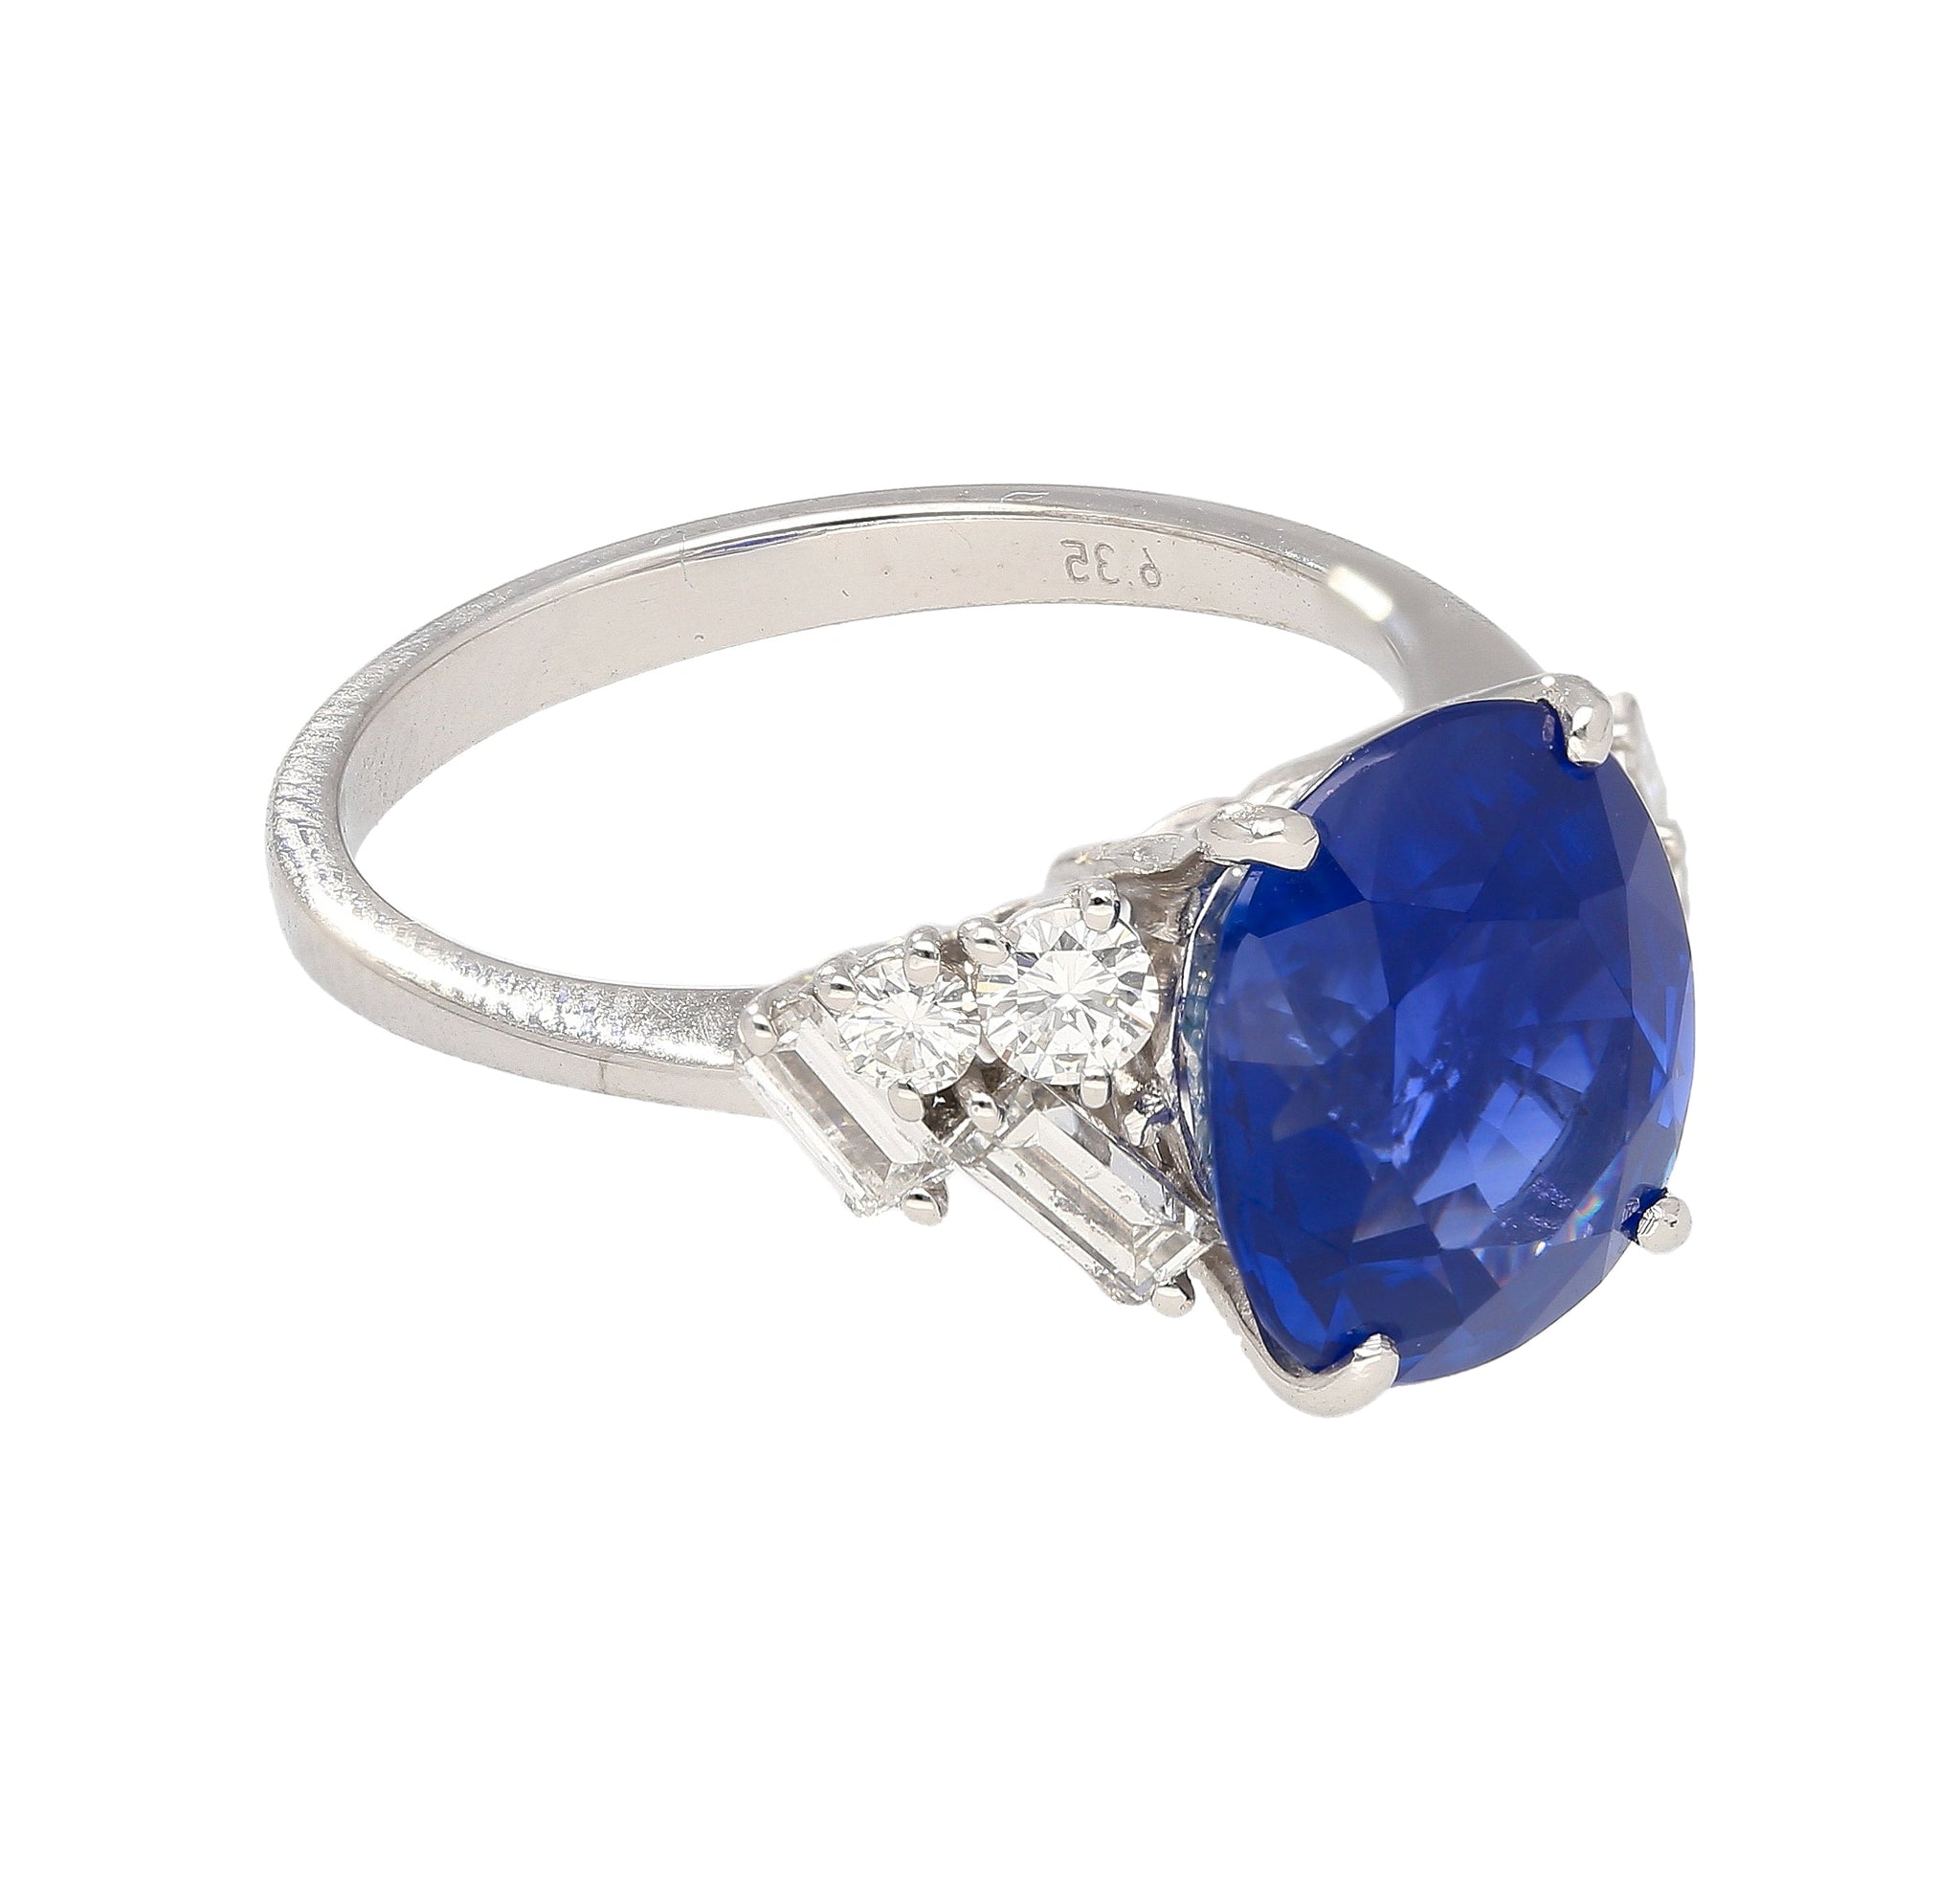 GRS Certified 6.35 Carat Oval Cut Royal Blue Sapphire with Diamonds in Platinum Ring